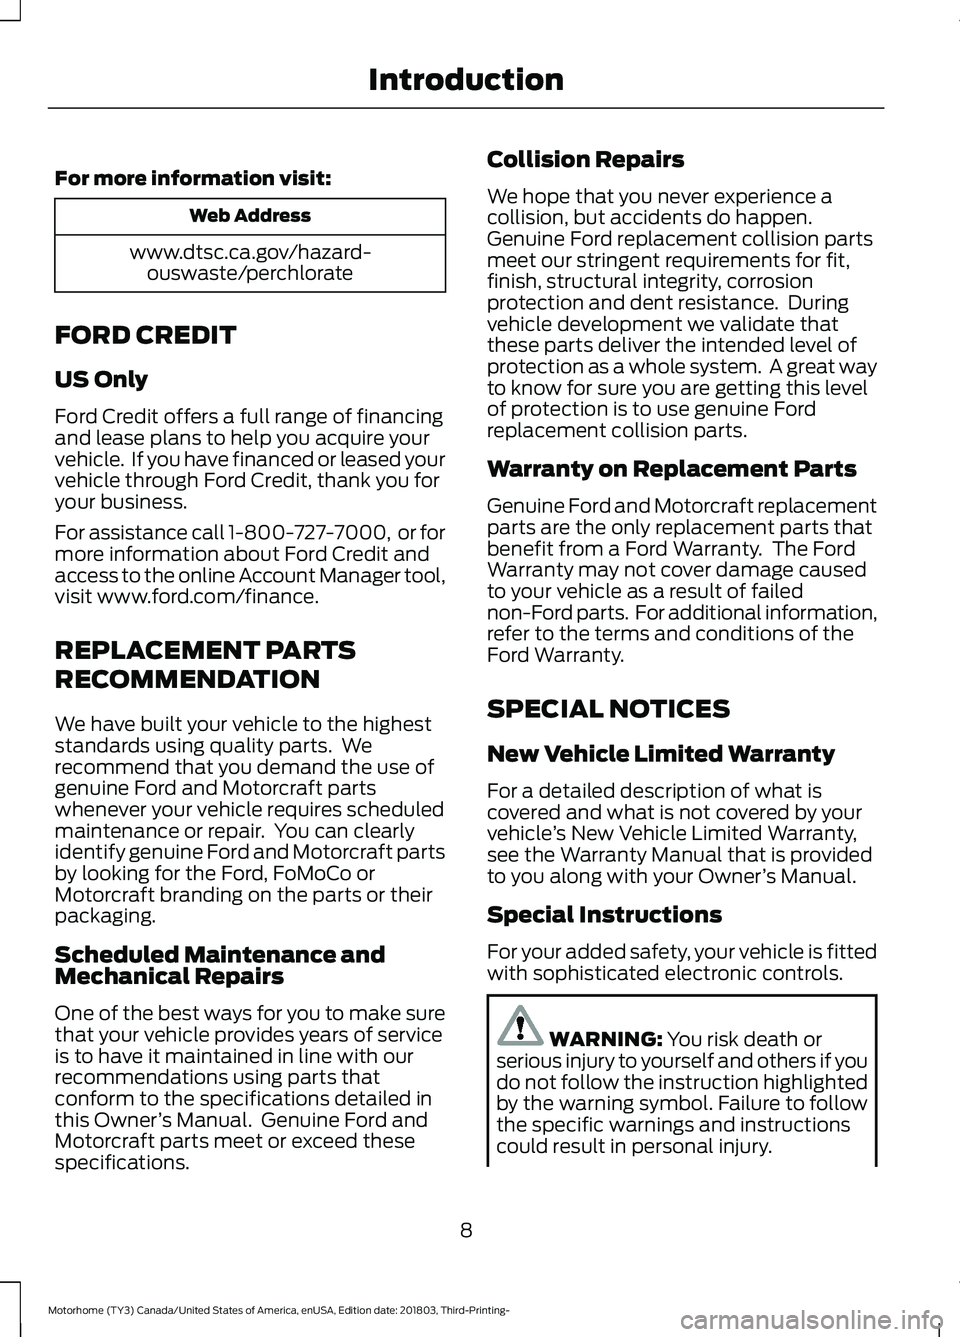 FORD F-53 2019 User Guide For more information visit:
Web Address
www.dtsc.ca.gov/hazard-ouswaste/perchlorate
FORD CREDIT
US Only
Ford Credit offers a full range of financingand lease plans to help you acquire yourvehicle.  If